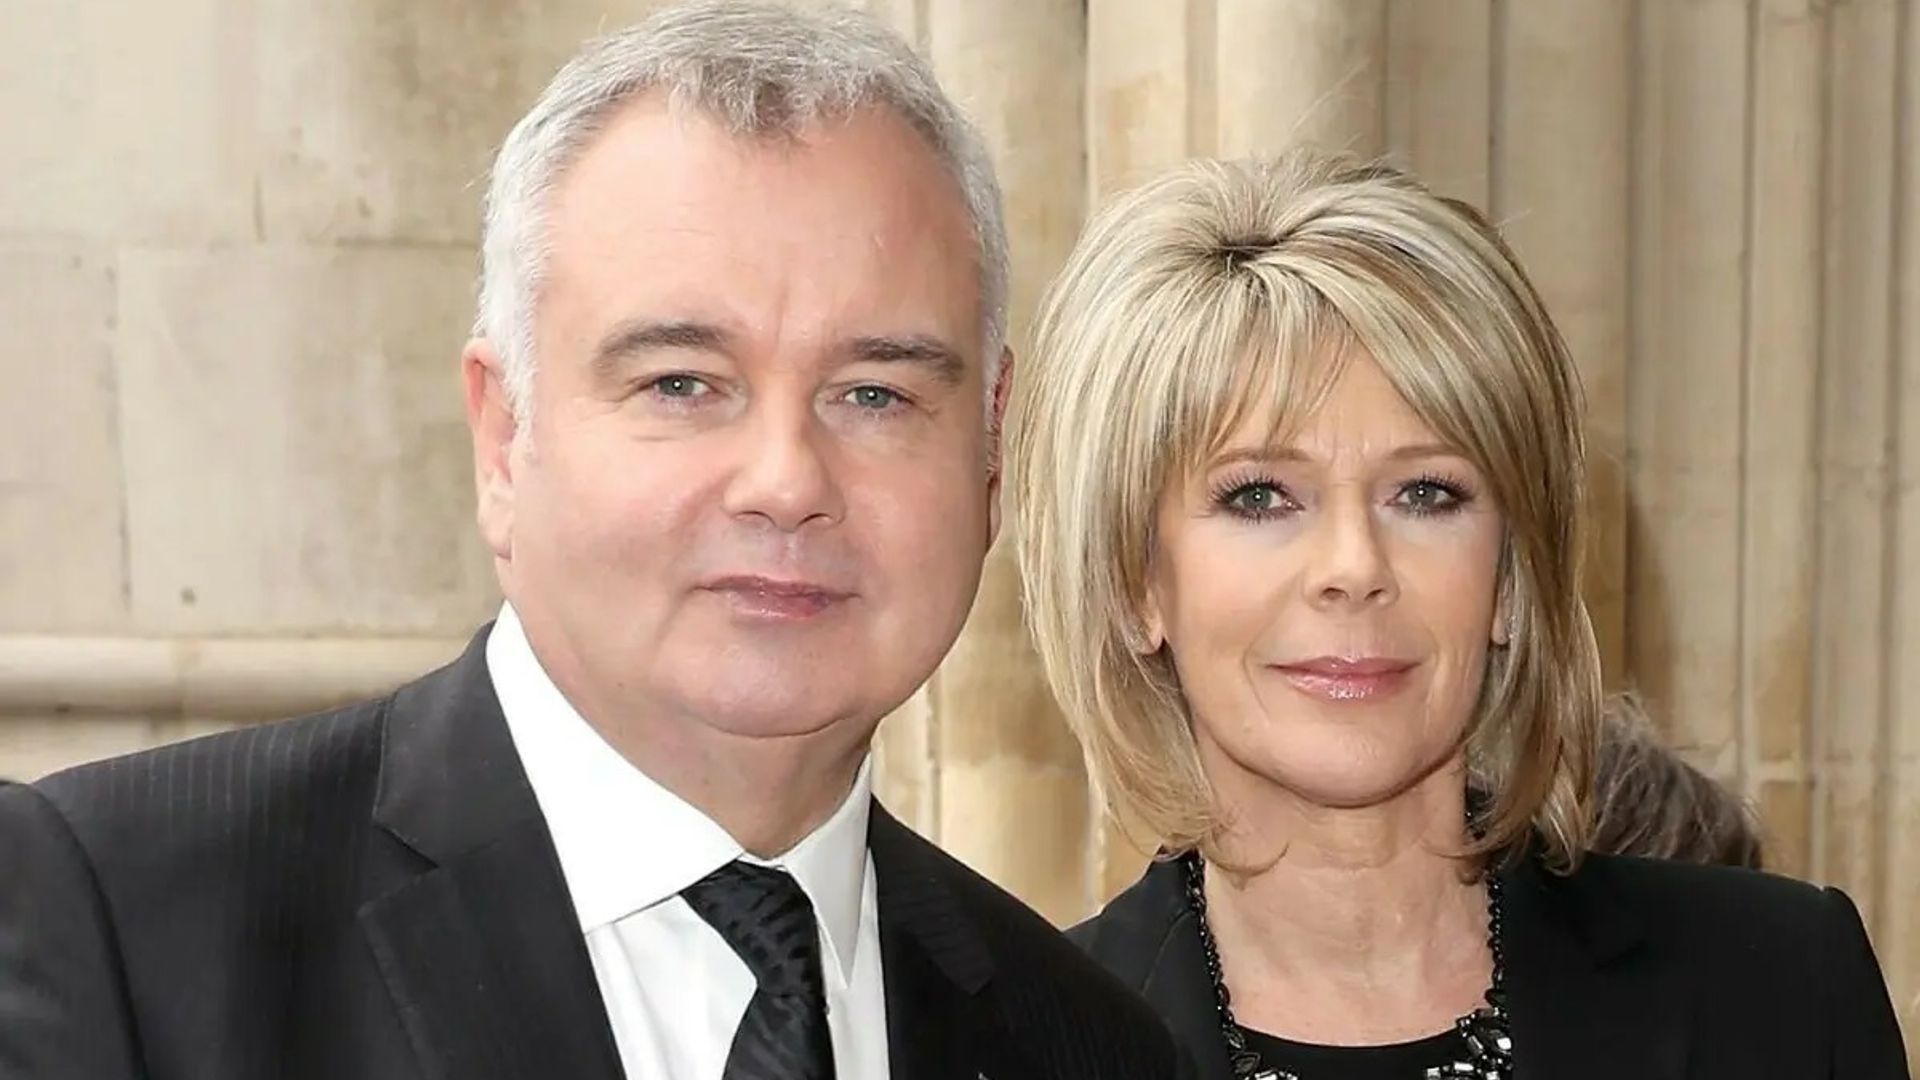 Ruth Langsford reveals the way she copes after row with Eamonn Holmes